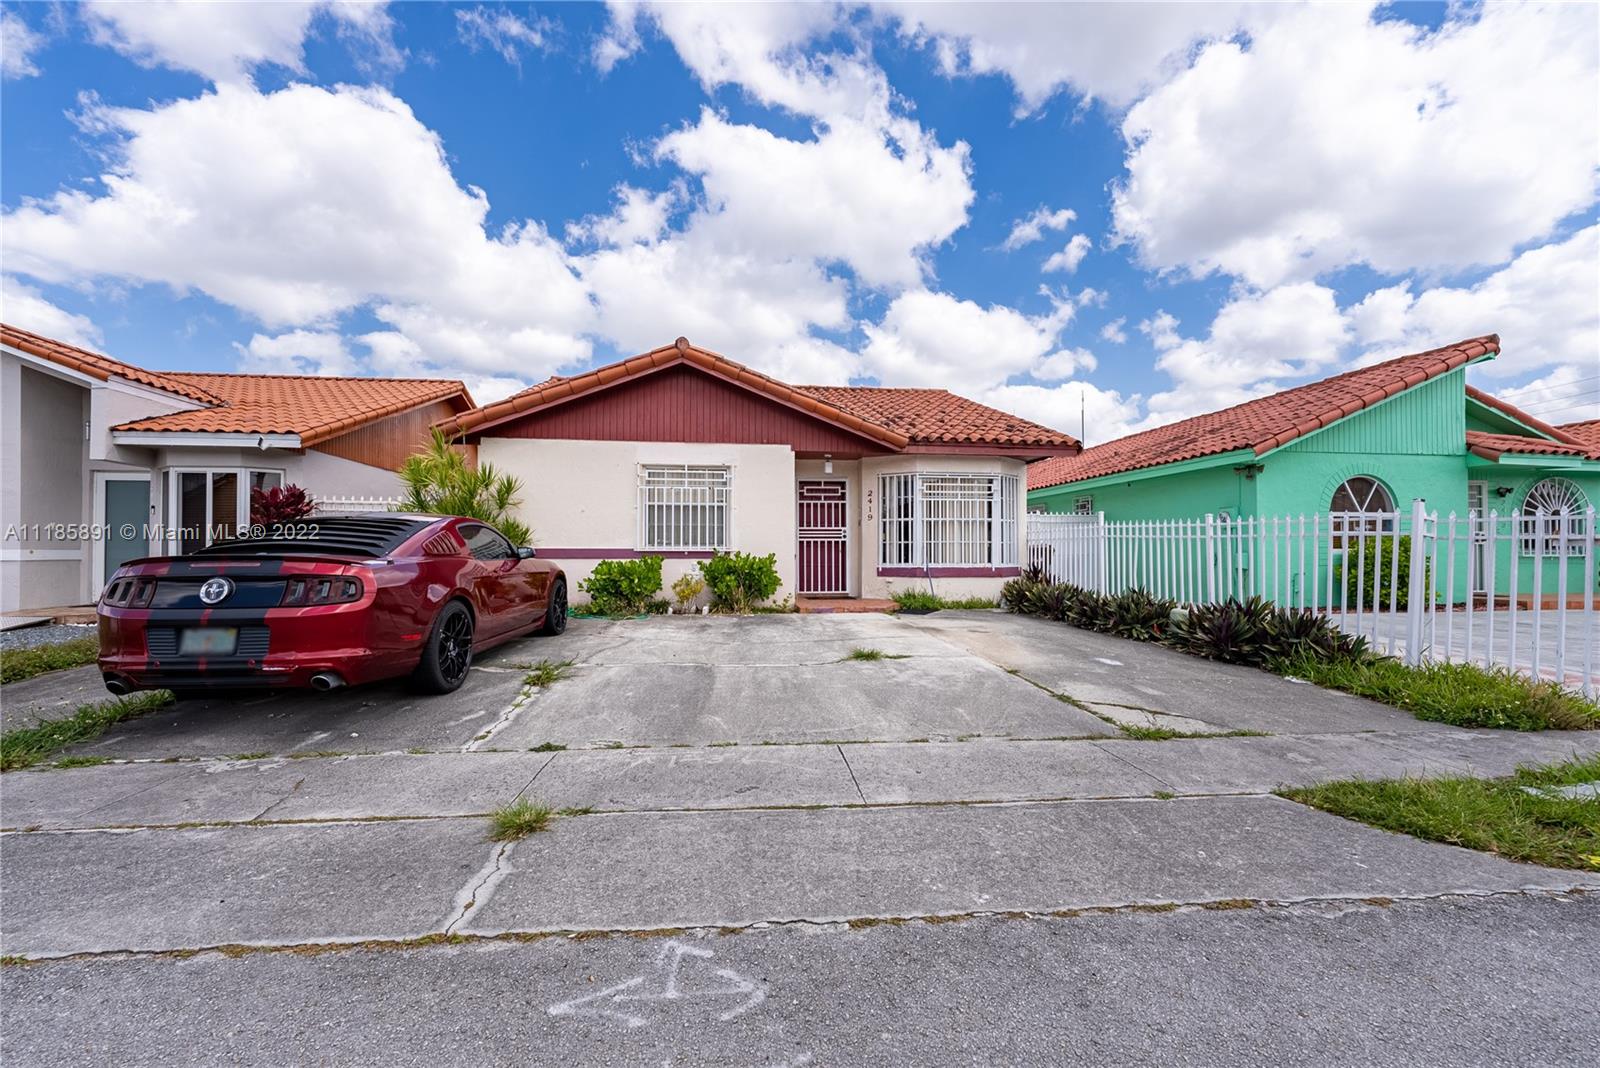 2419 W 73rd Pl, Hialeah, Florida 33016, 3 Bedrooms Bedrooms, ,2 BathroomsBathrooms,Residential,For Sale,2419 W 73rd Pl,A11185891